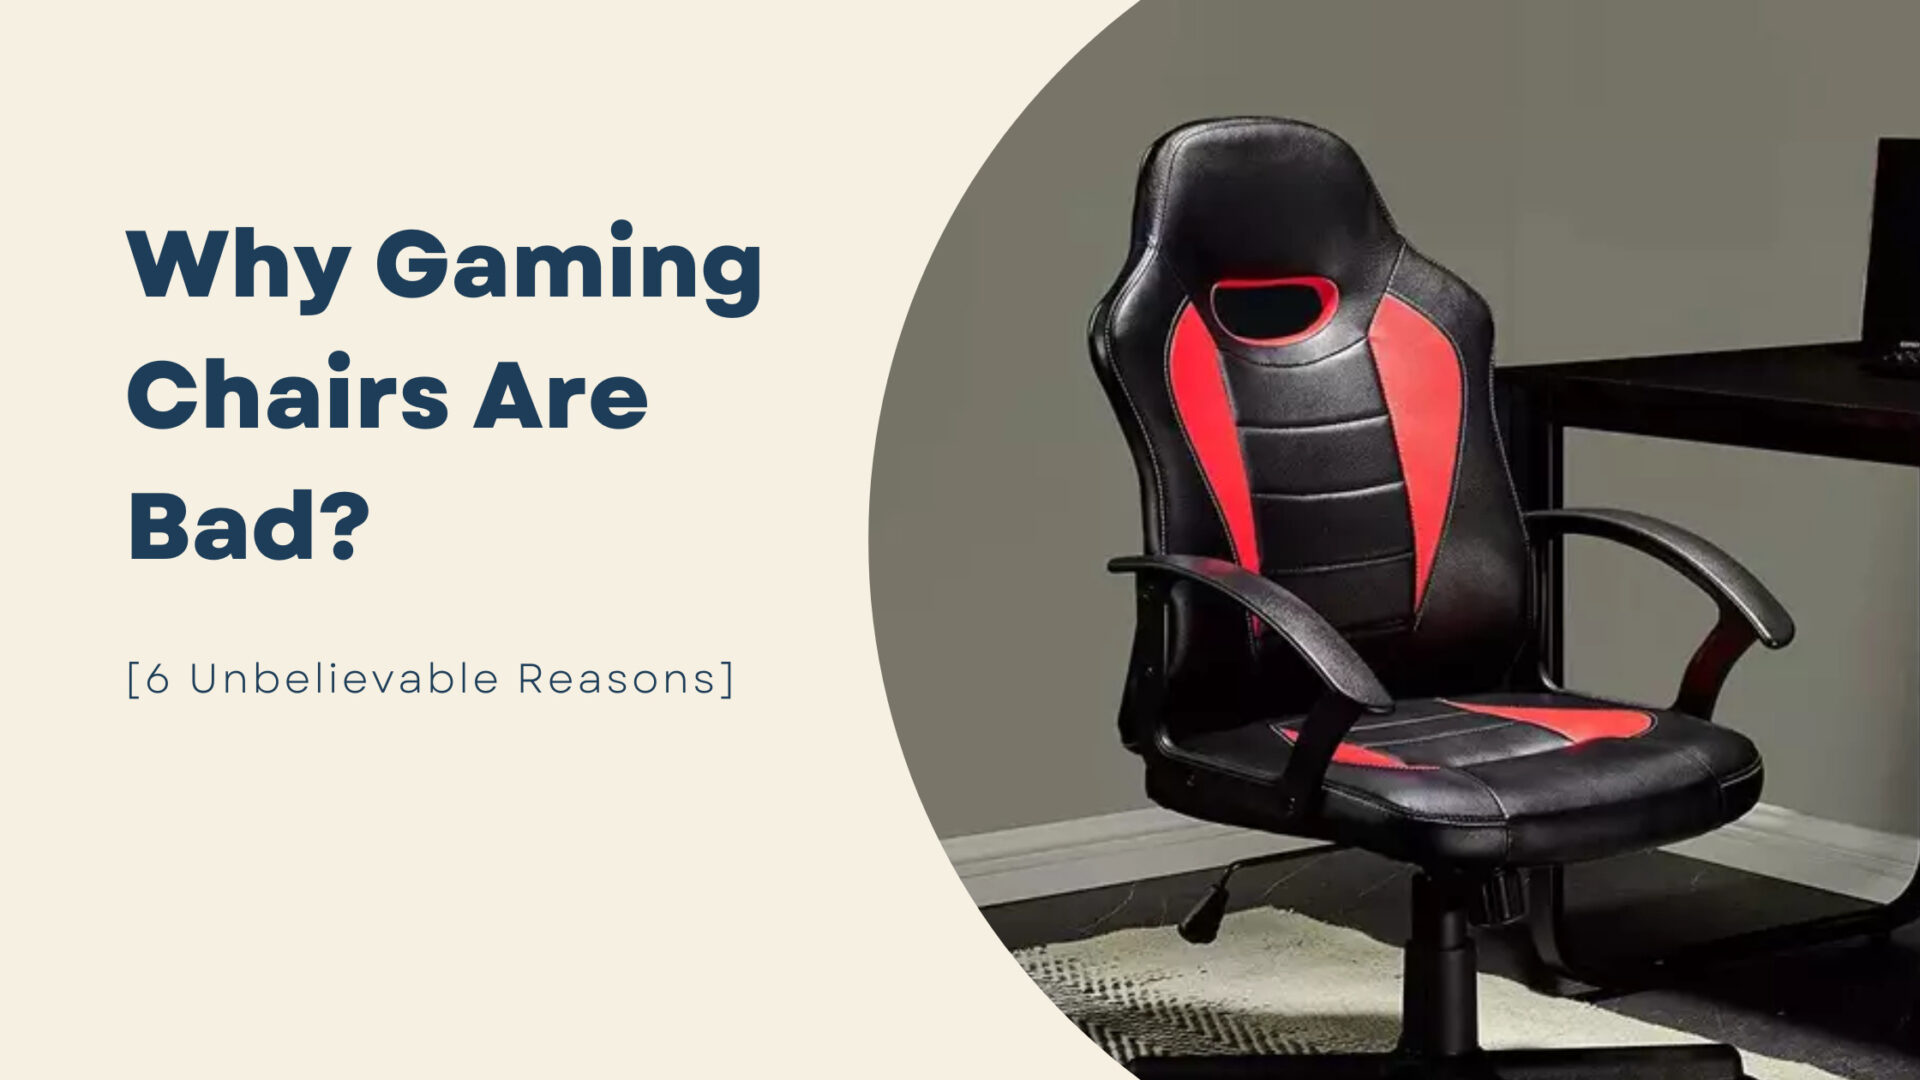 Why Gaming Chairs Are Bad